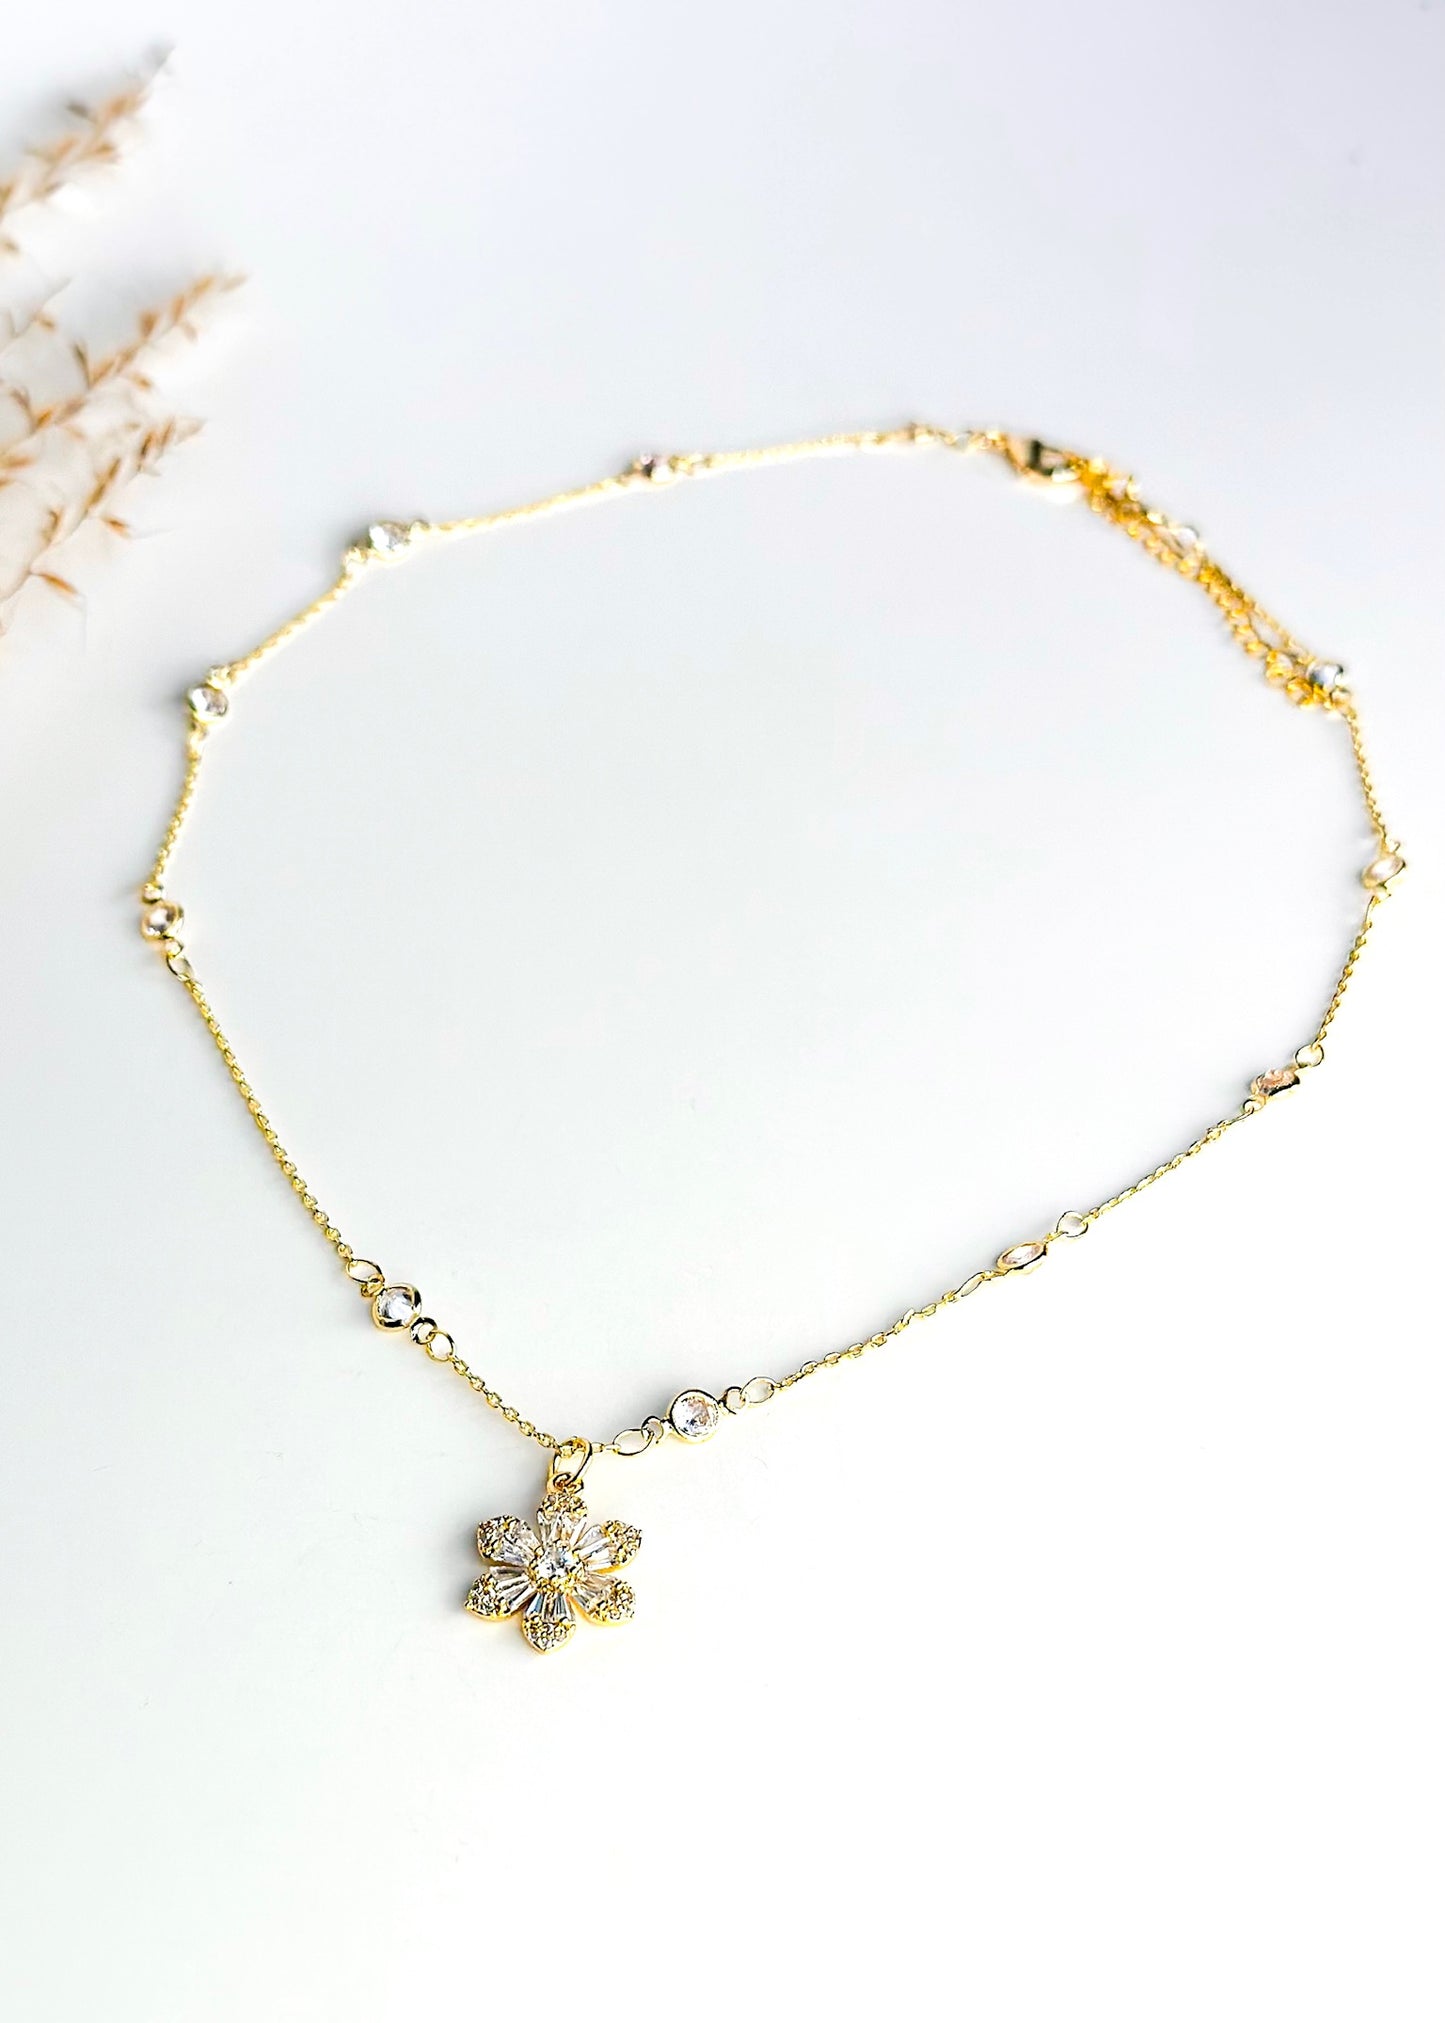 Dainty Crystal Flower Necklace